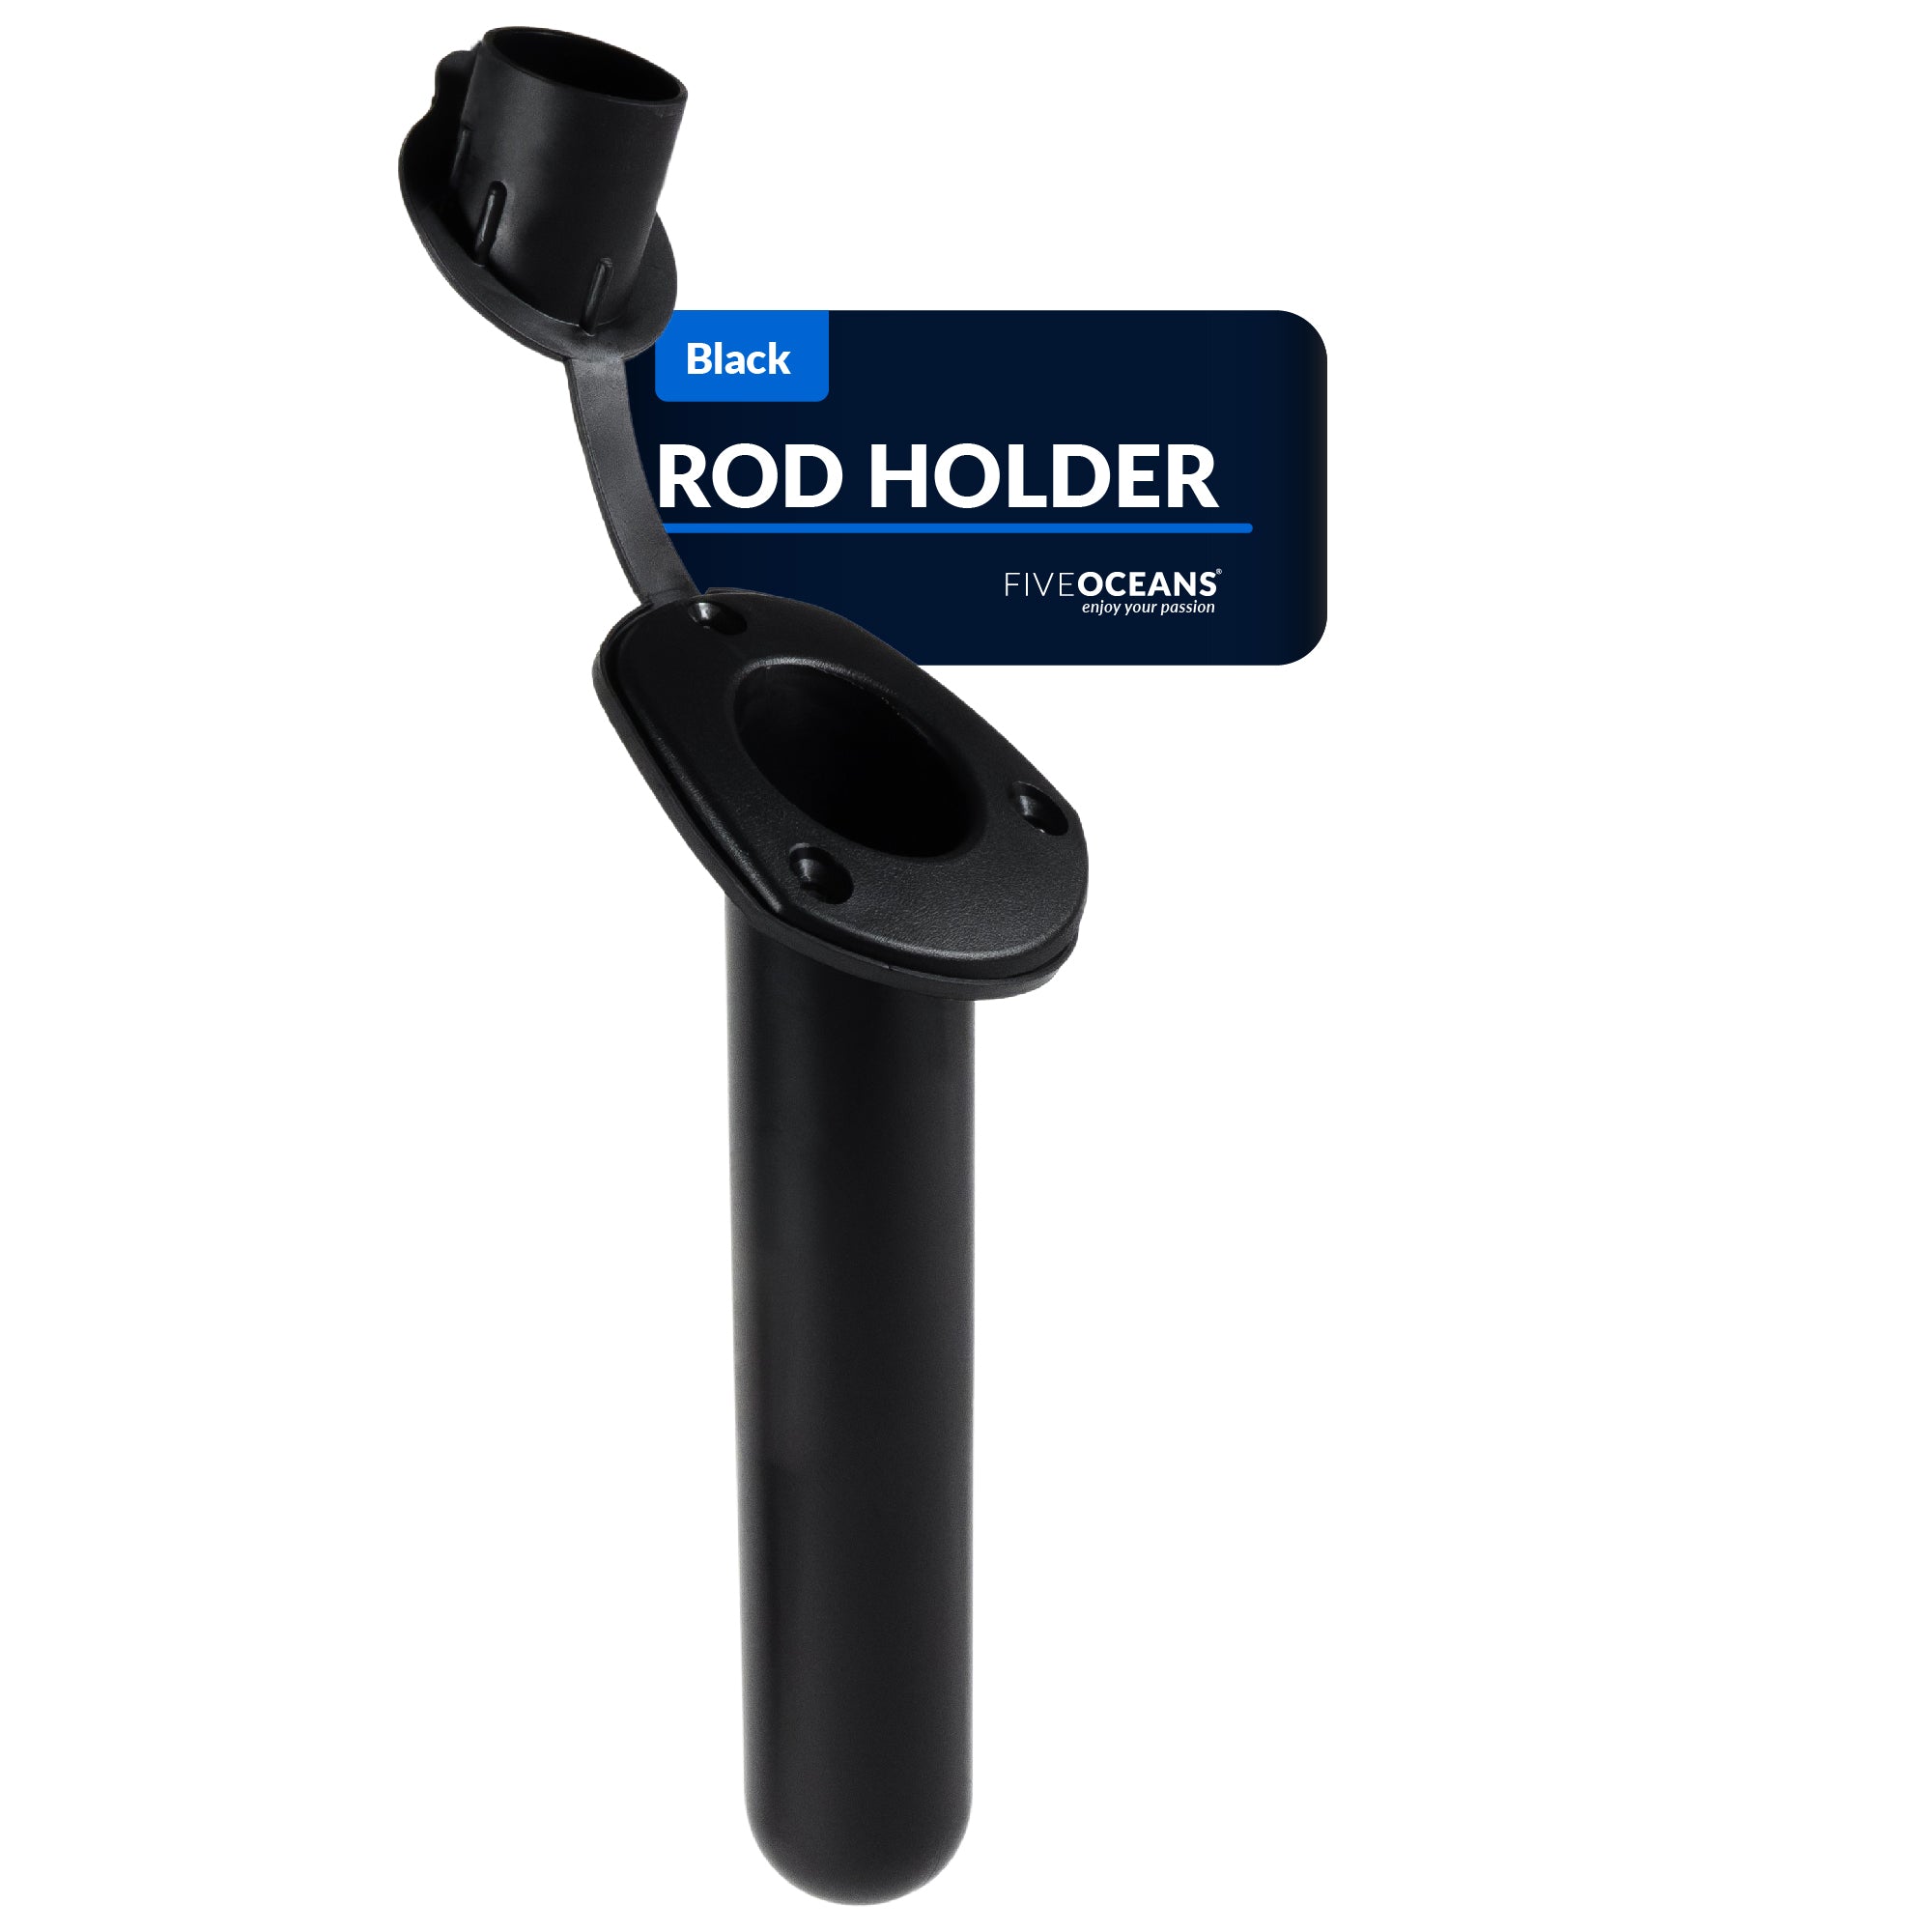 Rod Holder - Oval-Flange with PVC Cap - Black - FO4782